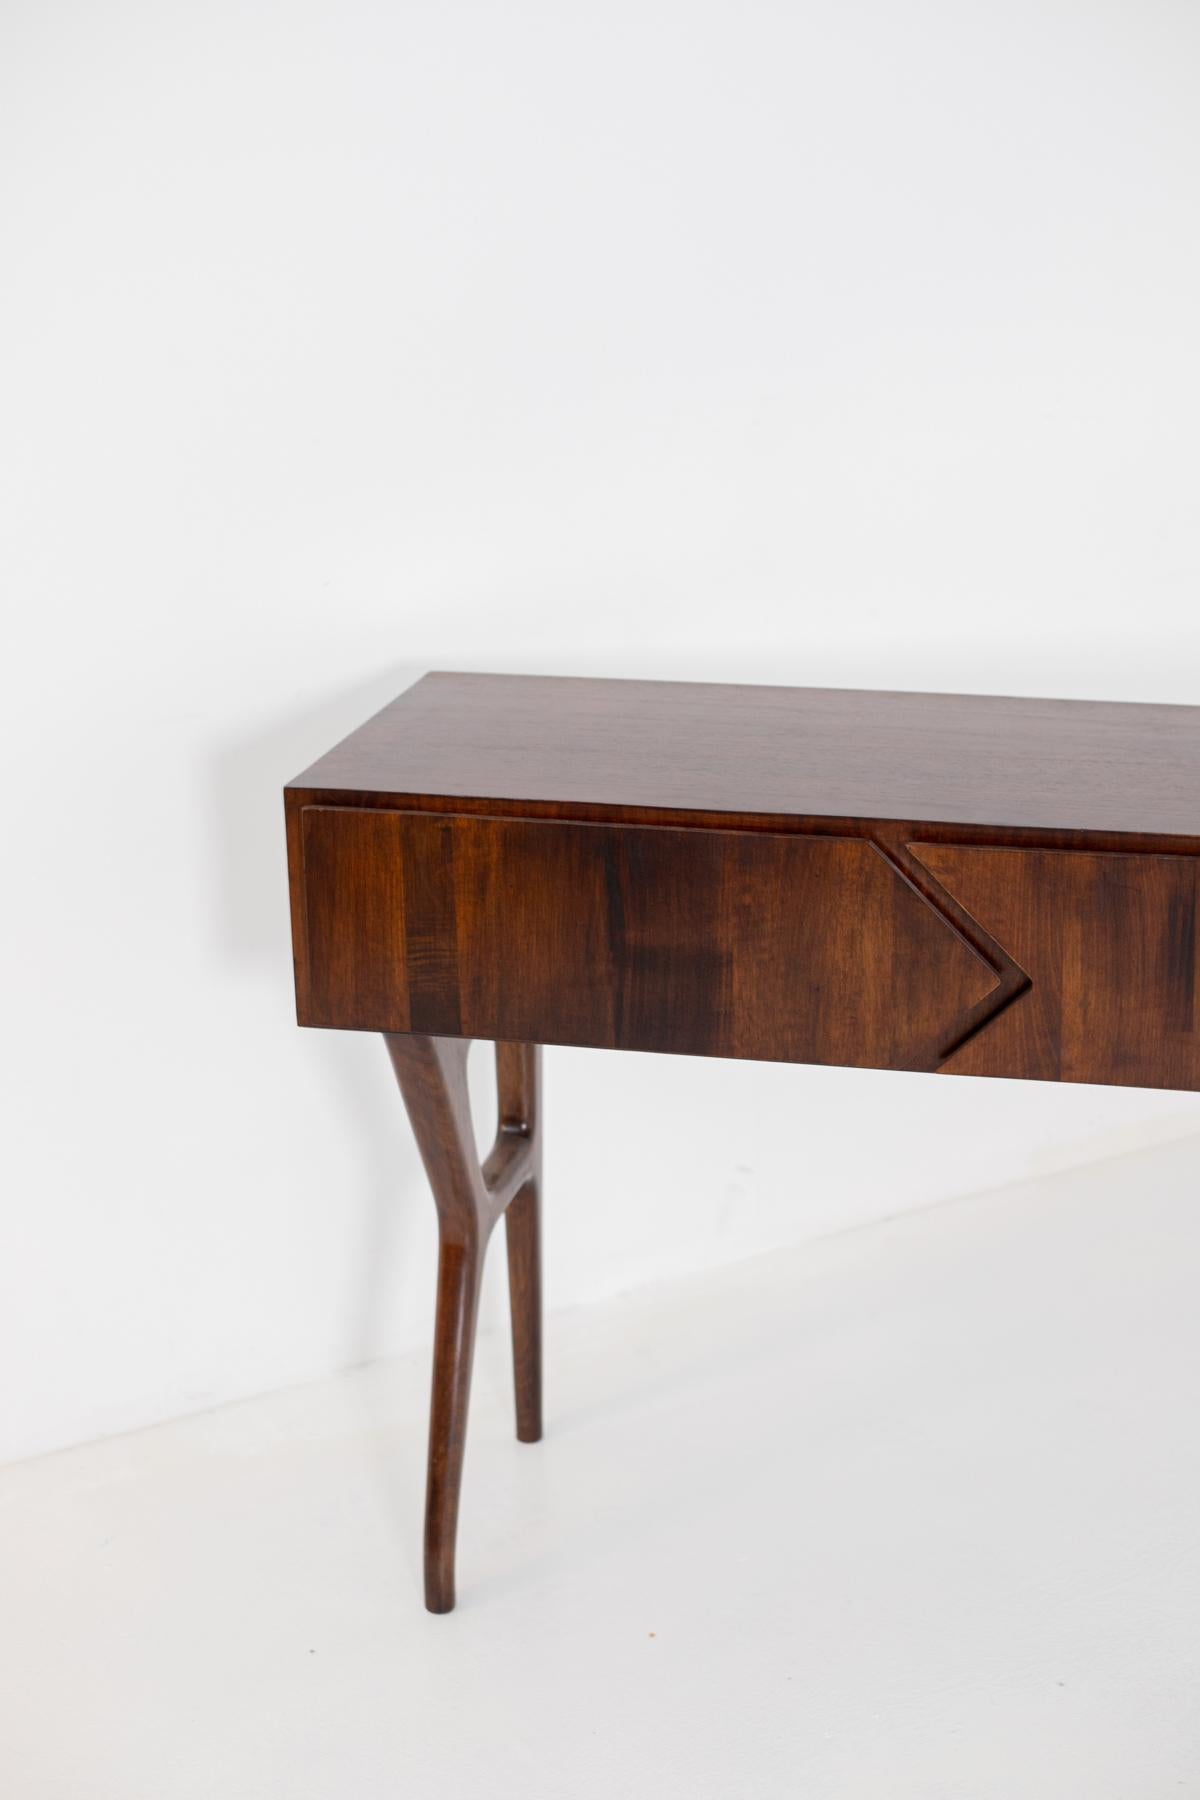 Mid-20th Century Italian Console Table Attributed to Melchiorre Bega in Walnut Wood